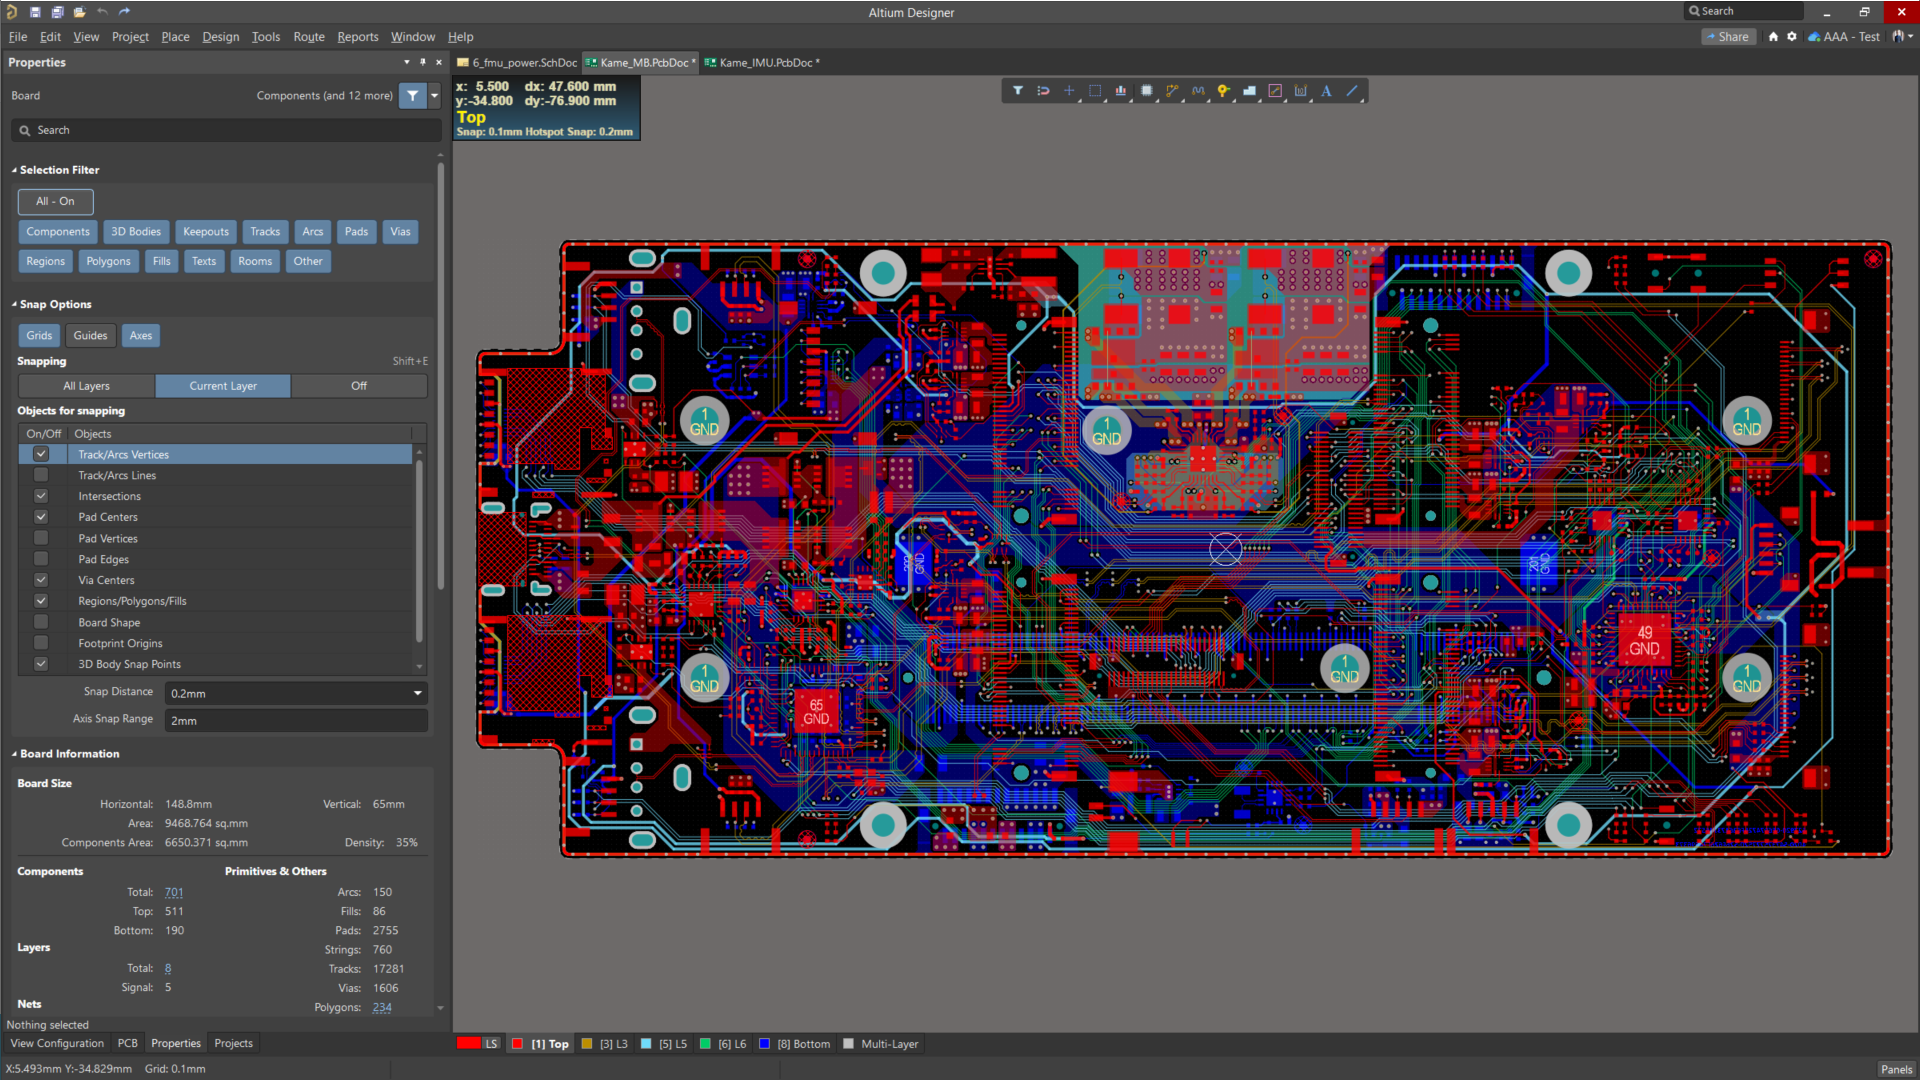 With Altium Designer you can rely on a unified data model to make circuit board design and layout easy. Design schematics, use schematic capture to create a new PCB, route printed circuit traces, and prepare for PCB assembly in a single program.